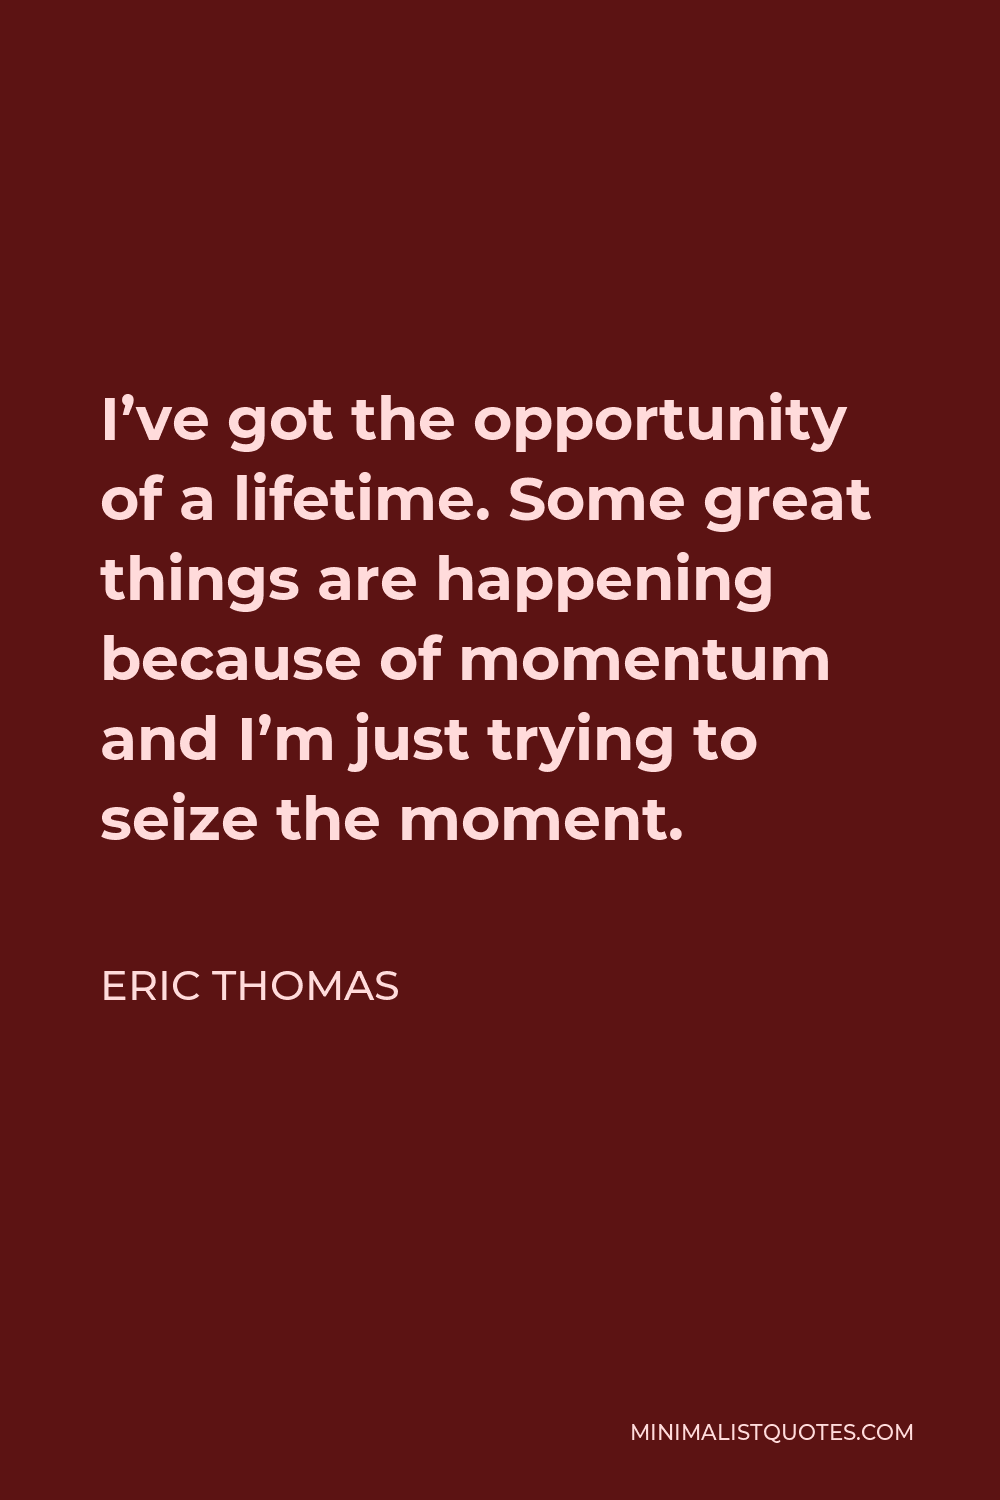 Eric Thomas Quote - I’ve got the opportunity of a lifetime. Some great things are happening because of momentum and I’m just trying to seize the moment.